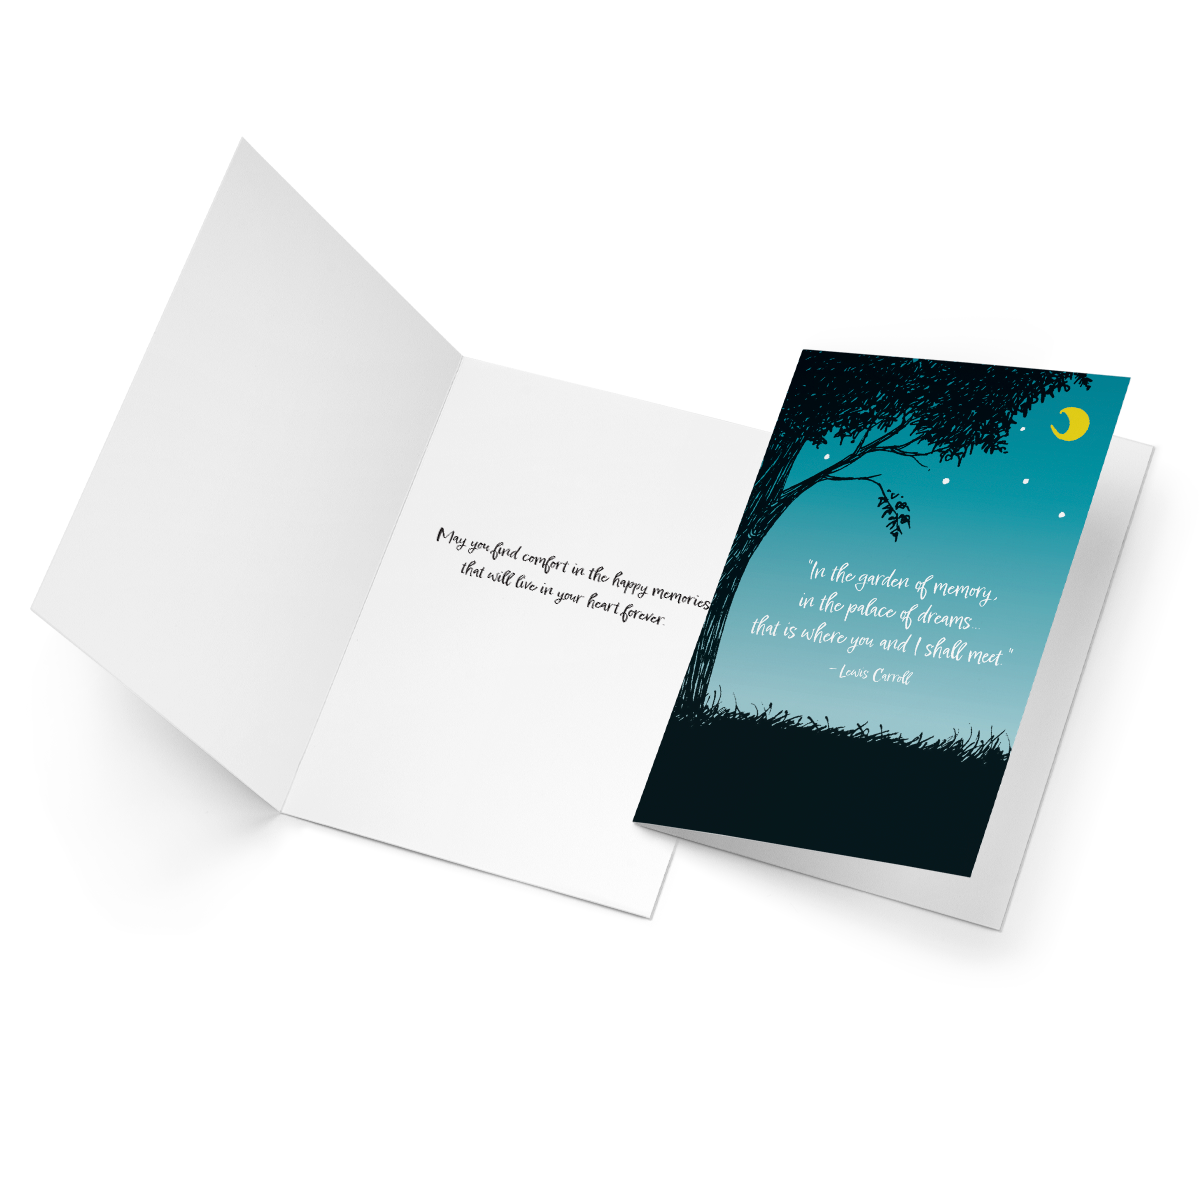 This lovely sympathy card features an image of a tree in the moonlight and includes the Lewis Carroll quote, 